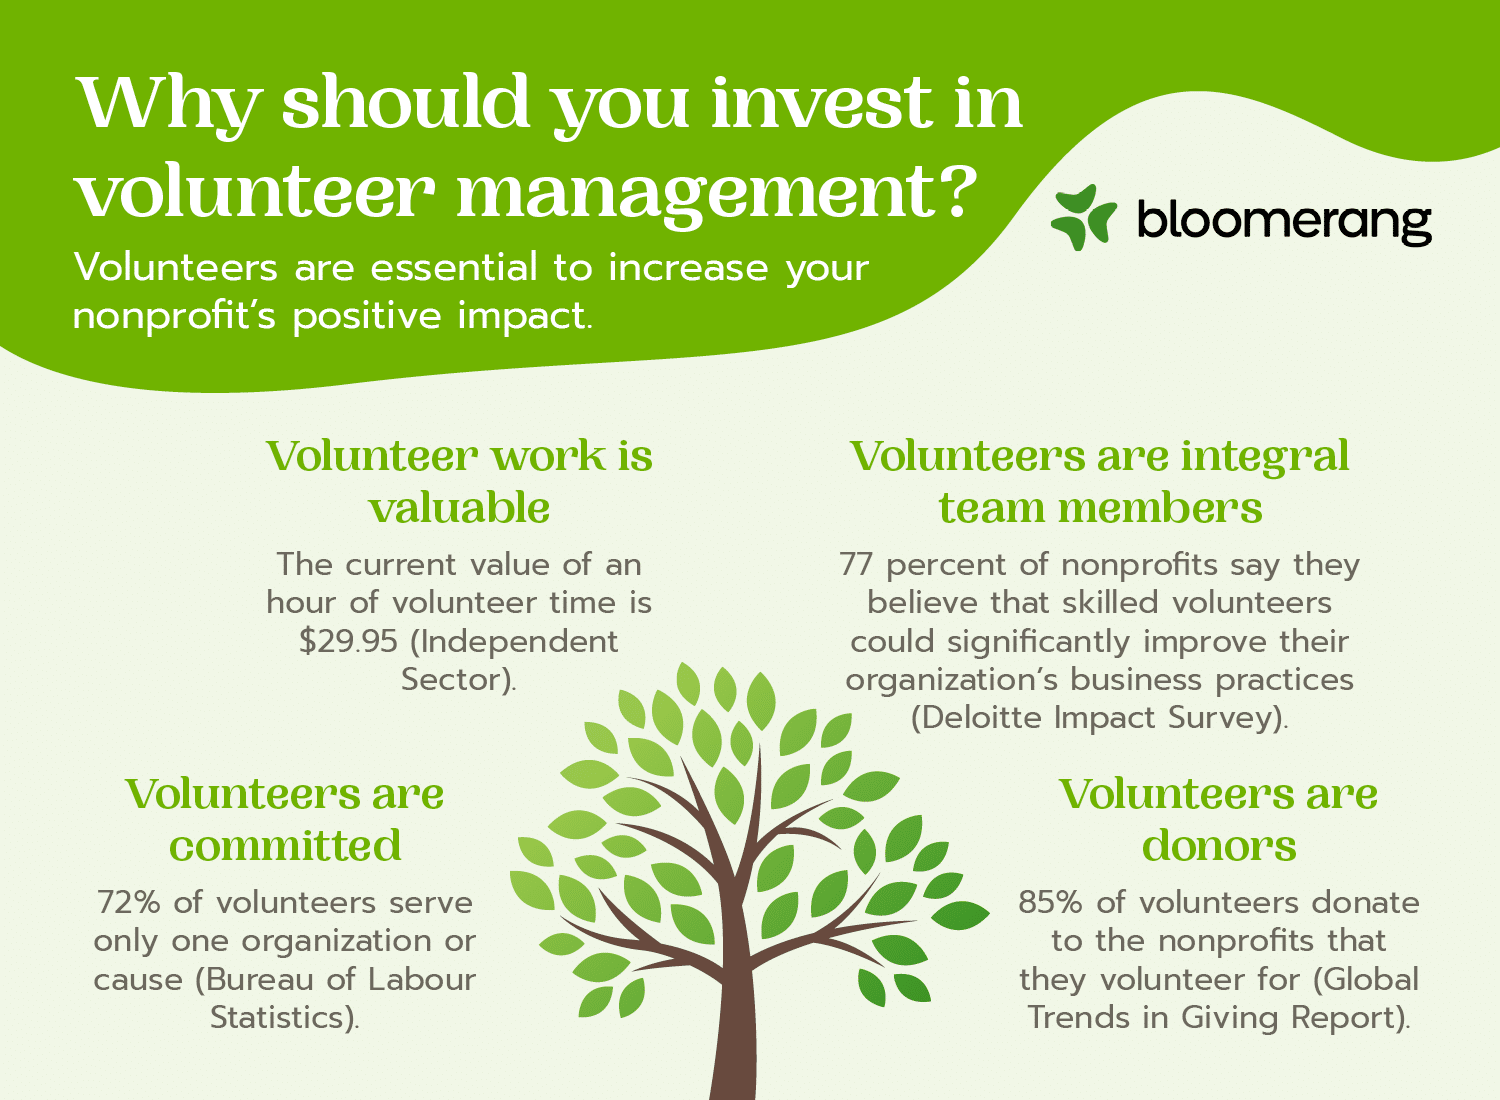 This infographic displays the importance of volunteer management by sharing relevant volunteer statistics, which are listed below.